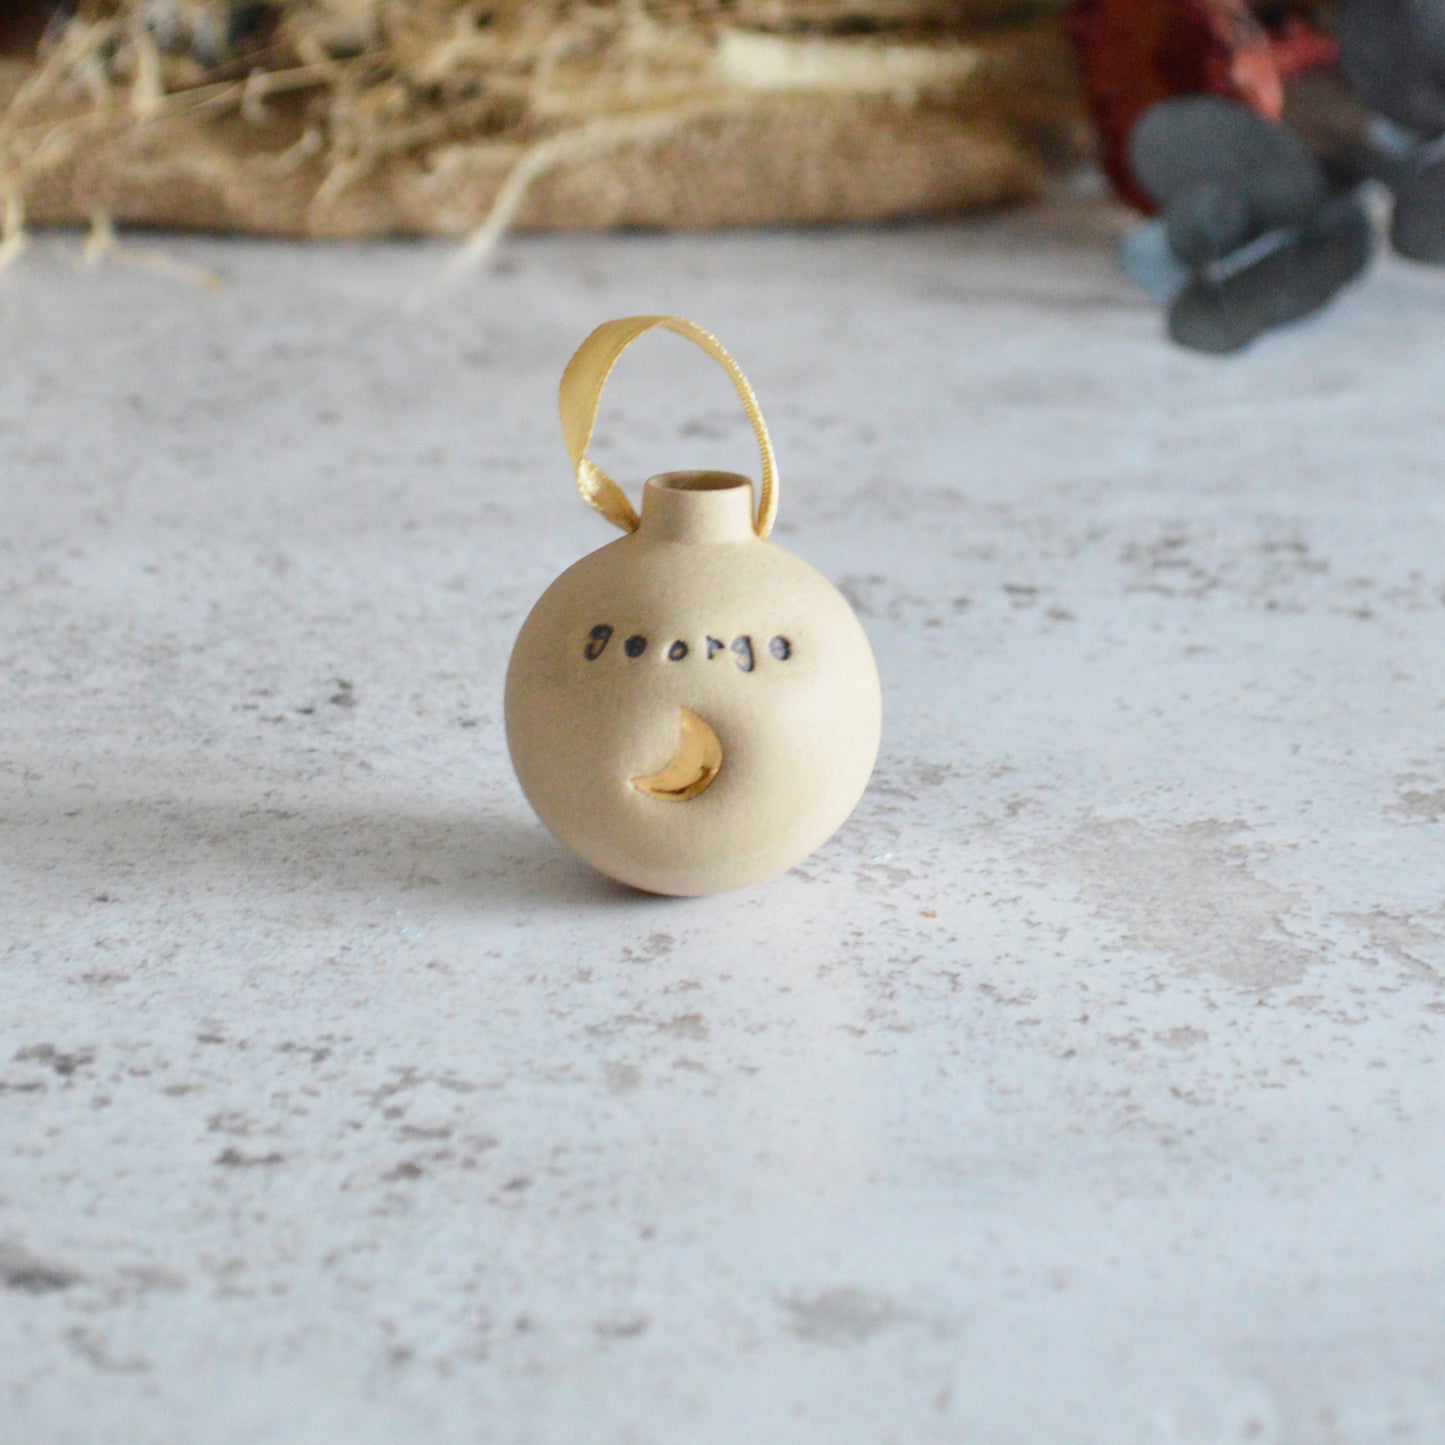 PERSONALISED Small Pastel Bauble With A Gold Heart | Stoneware | Hanging Christmas Decorations | Christmas Tree Decor